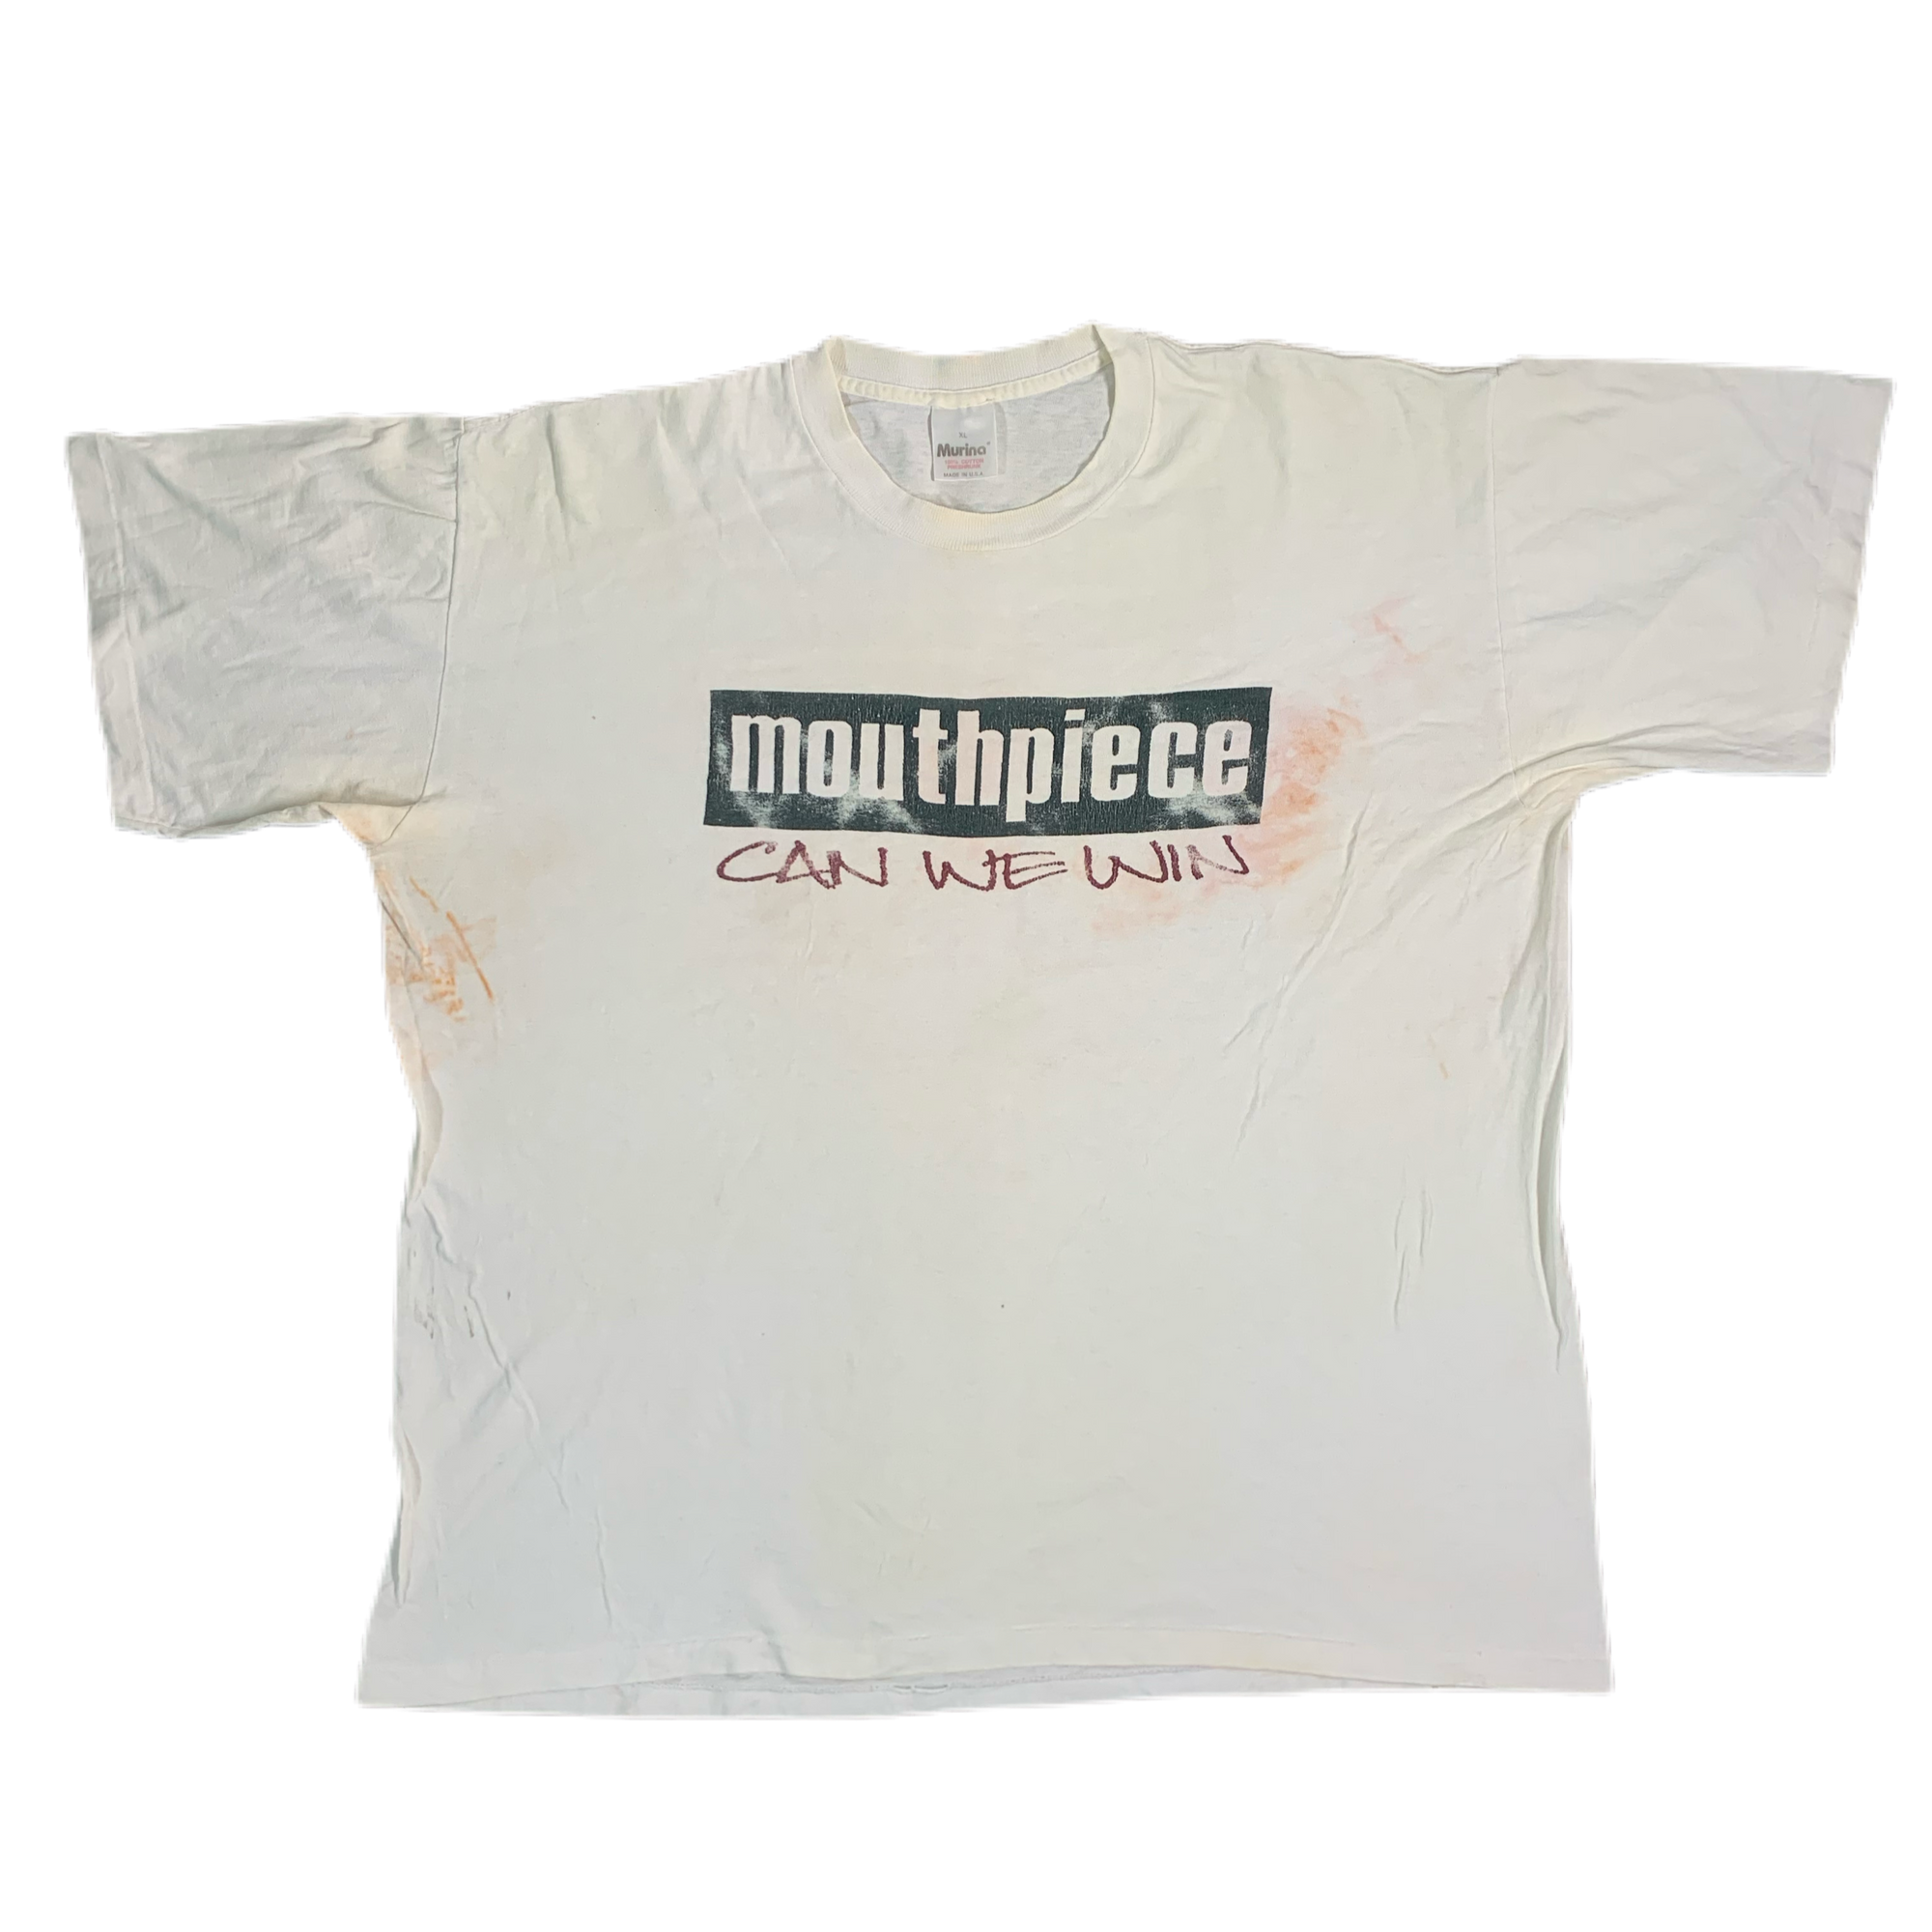 Vintage Mouthpiece "Can We Win" T-Shirt - jointcustodydc